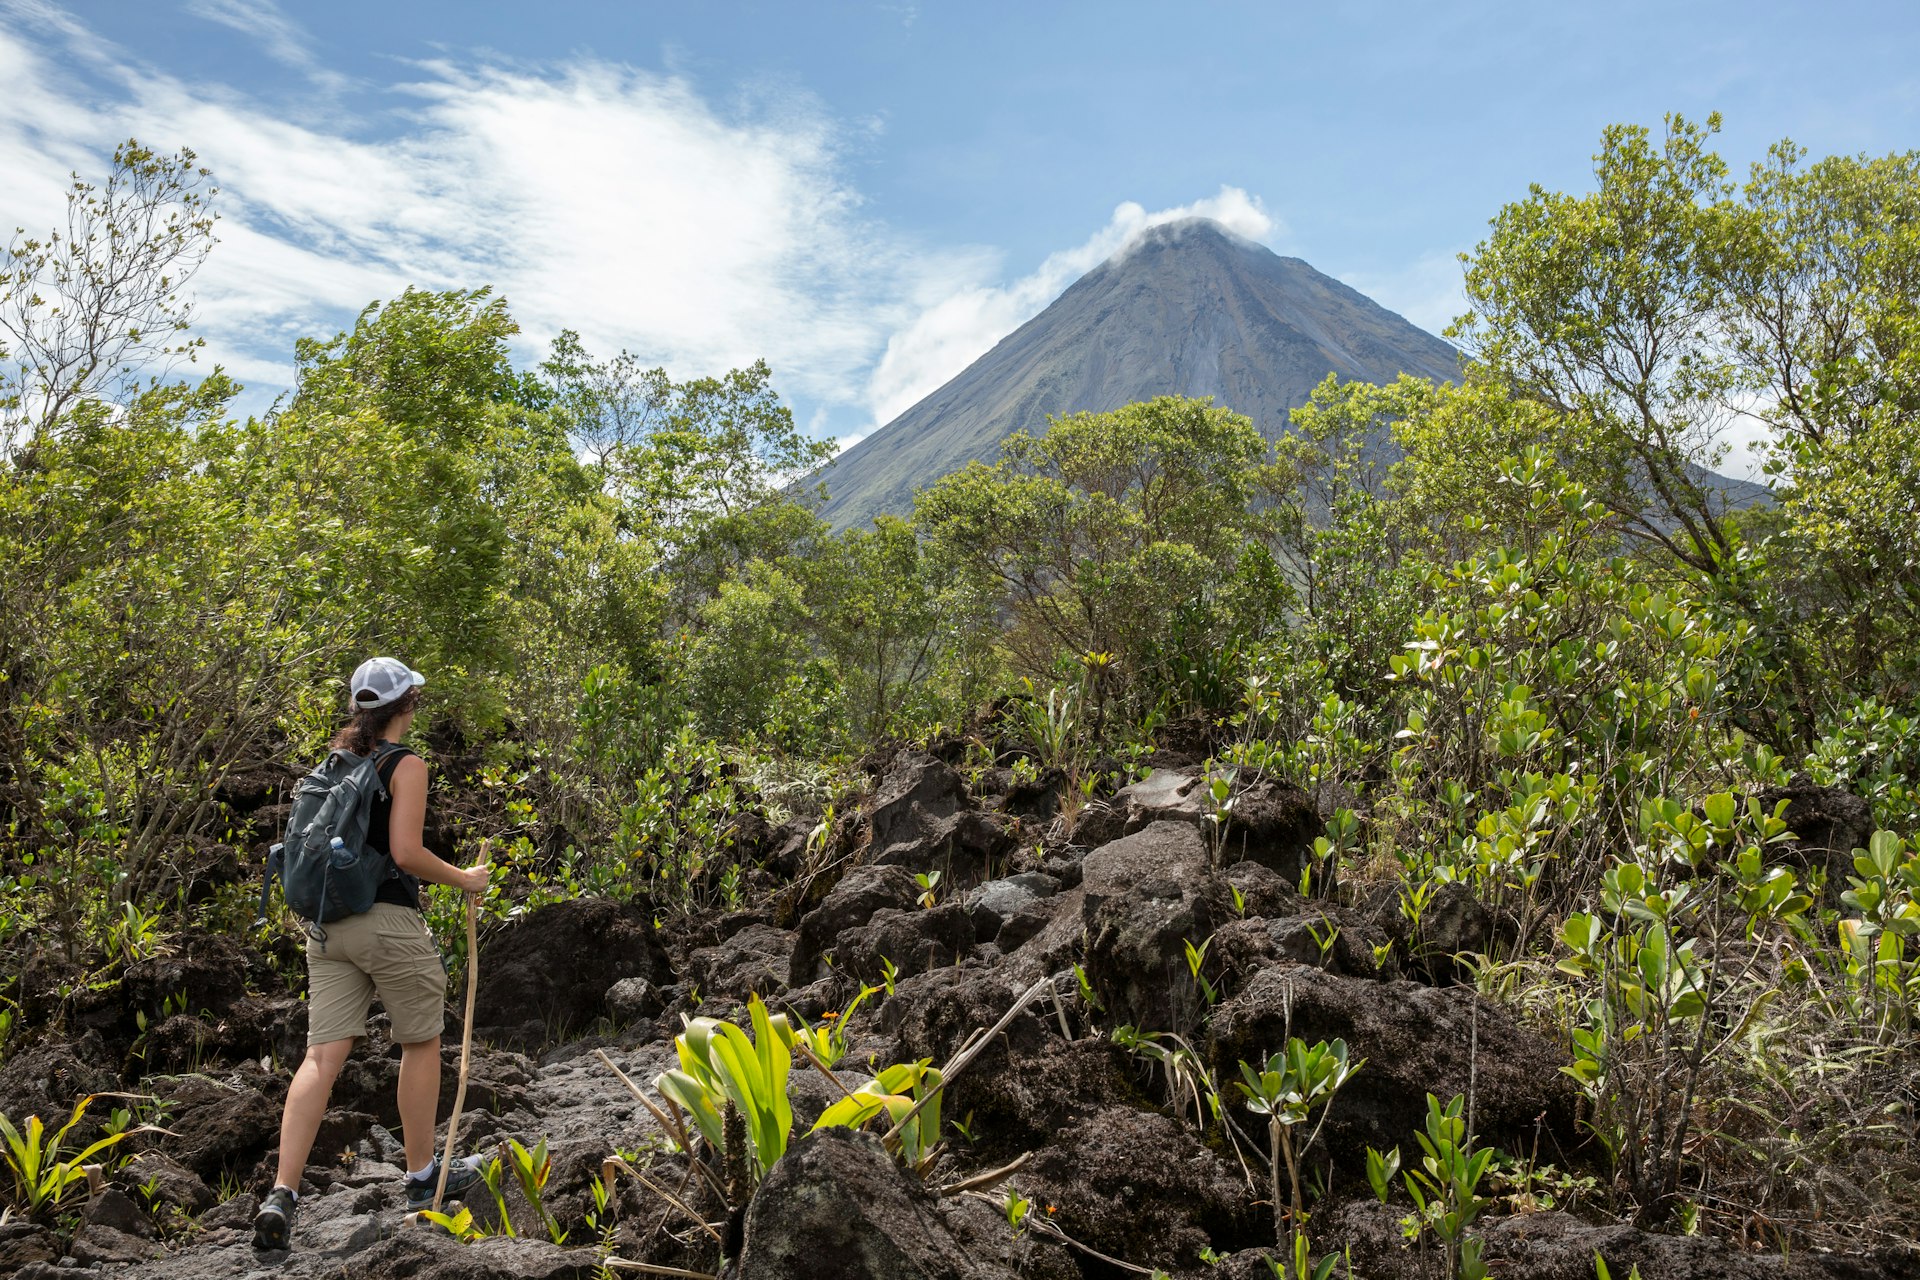 A hiker with a stick pauses on a trail to gaze at the huge volcano that dominates the jungle landscape